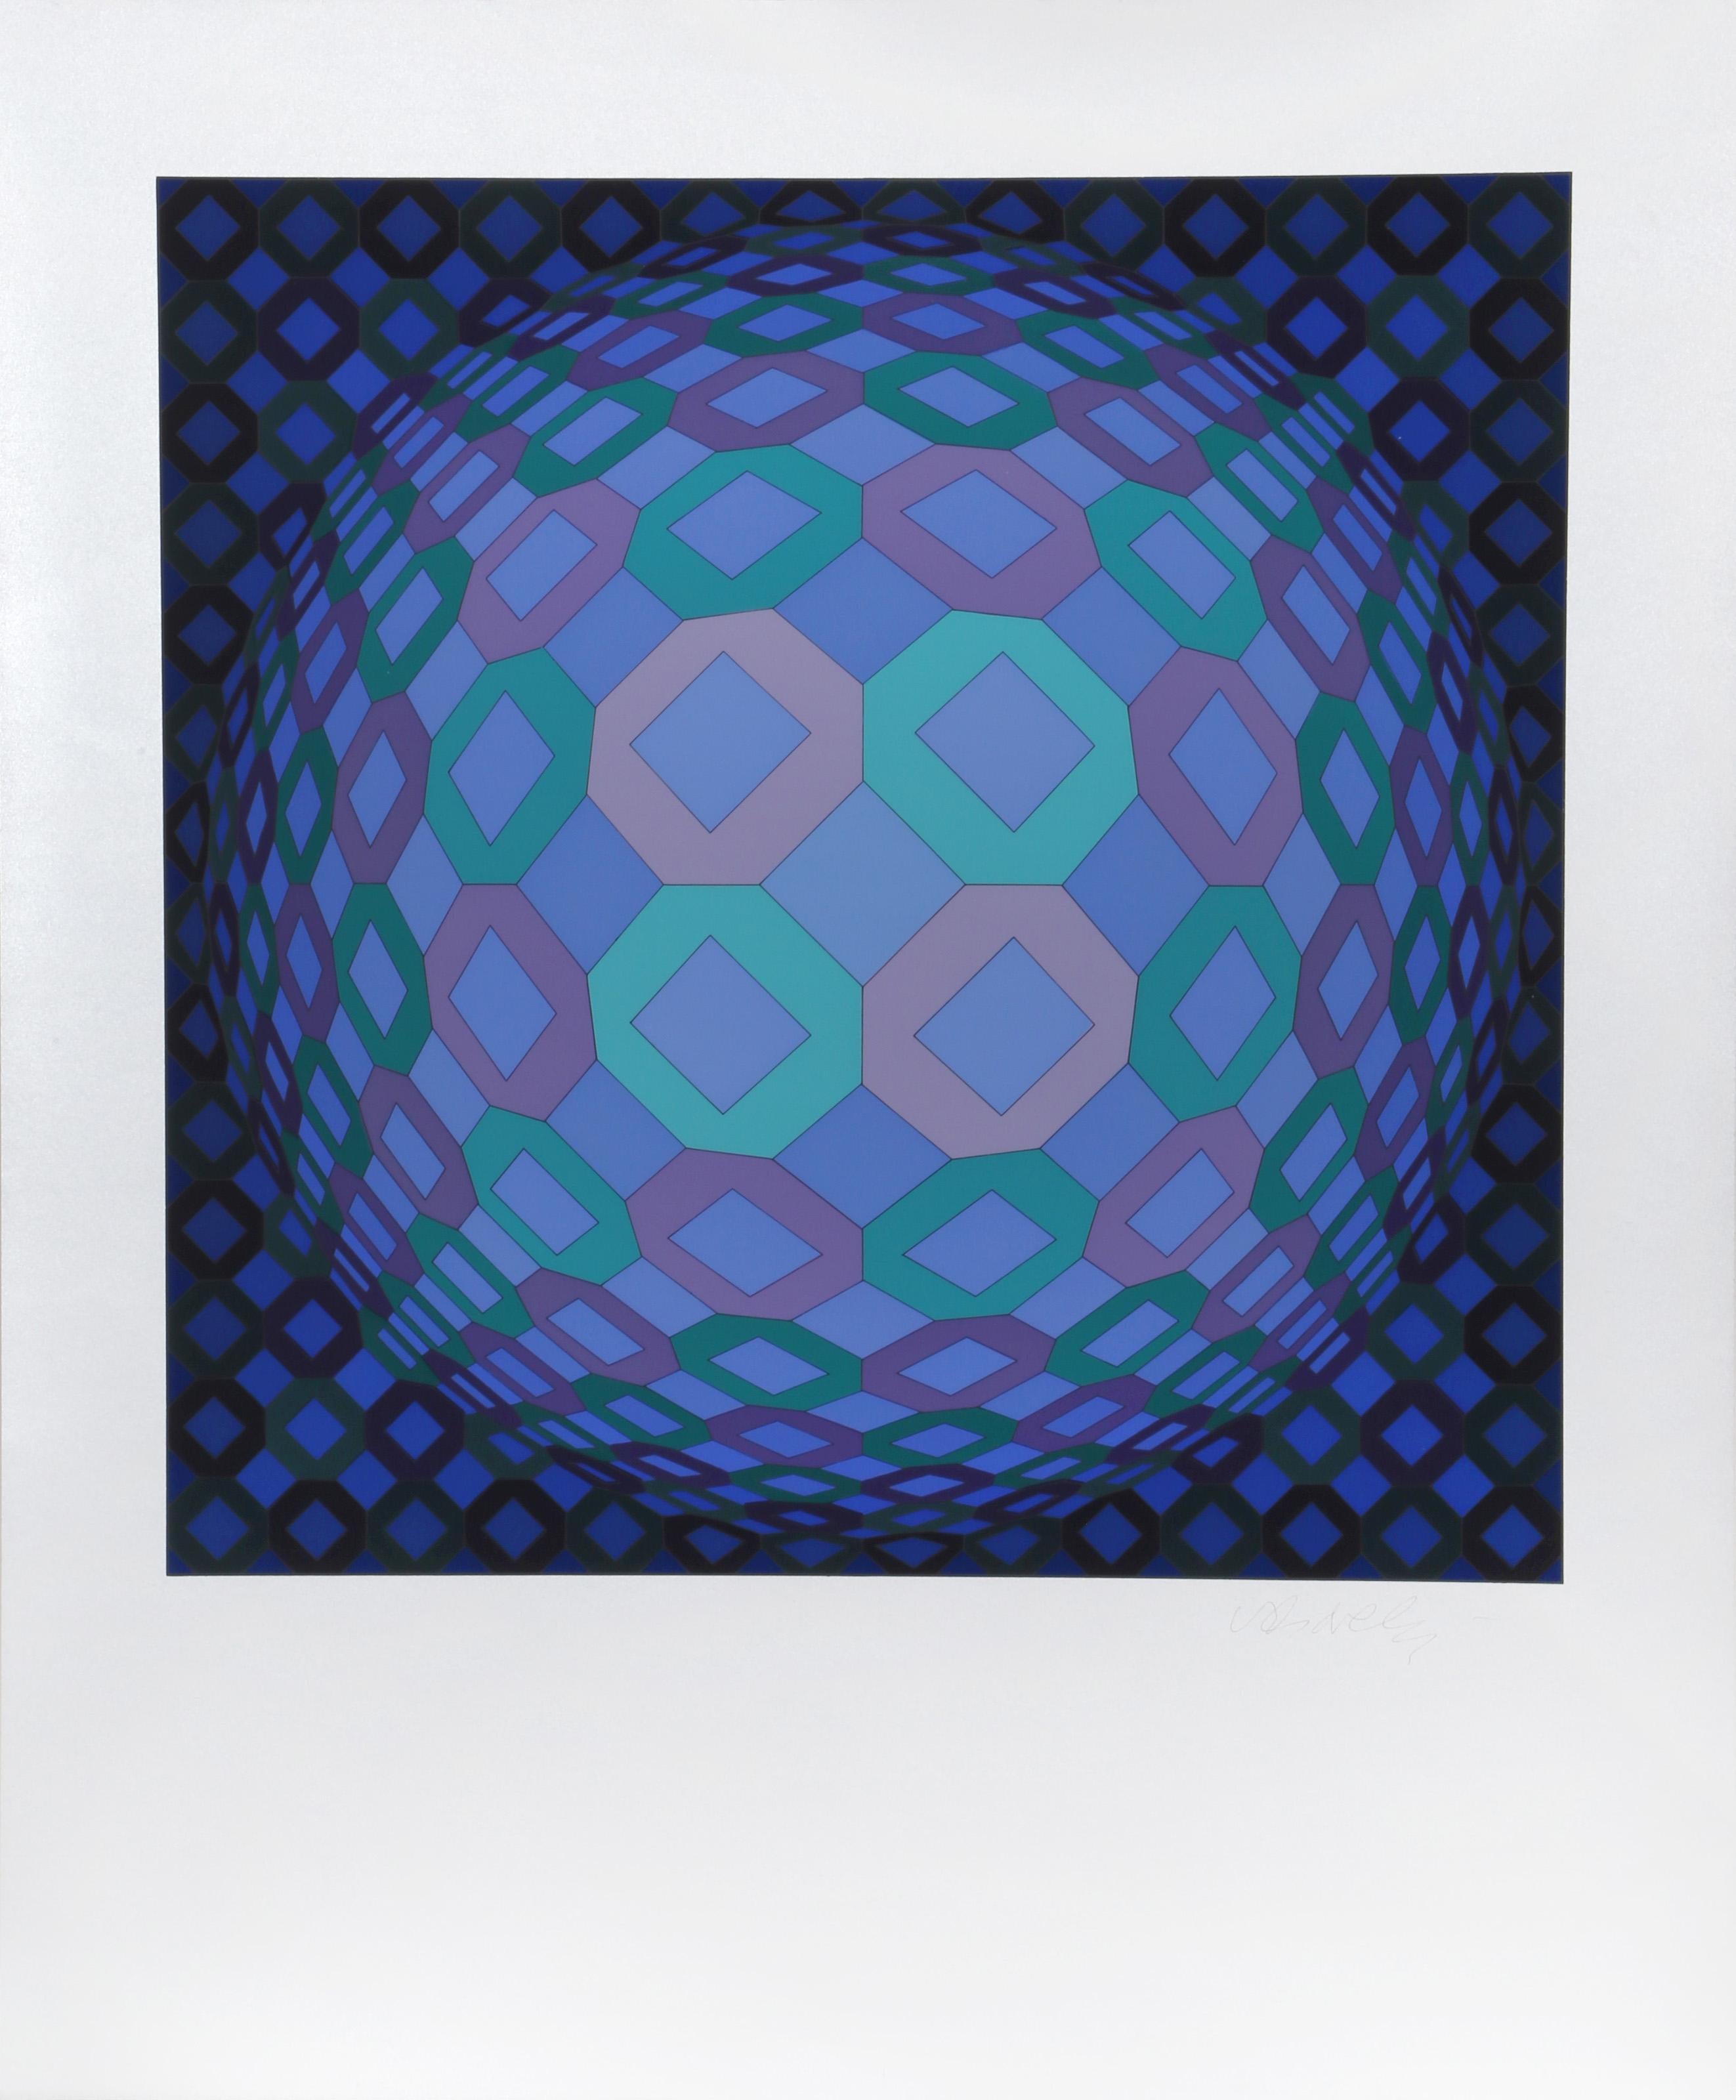 Victor Vasarely’s Op Art painting generates a sense of movement as it appears to warp into a sphere that is overlaid with stripes in a geometric pattern. This print includes the printer's information on the verso.

Okta-Pos
Victor Vasarely,